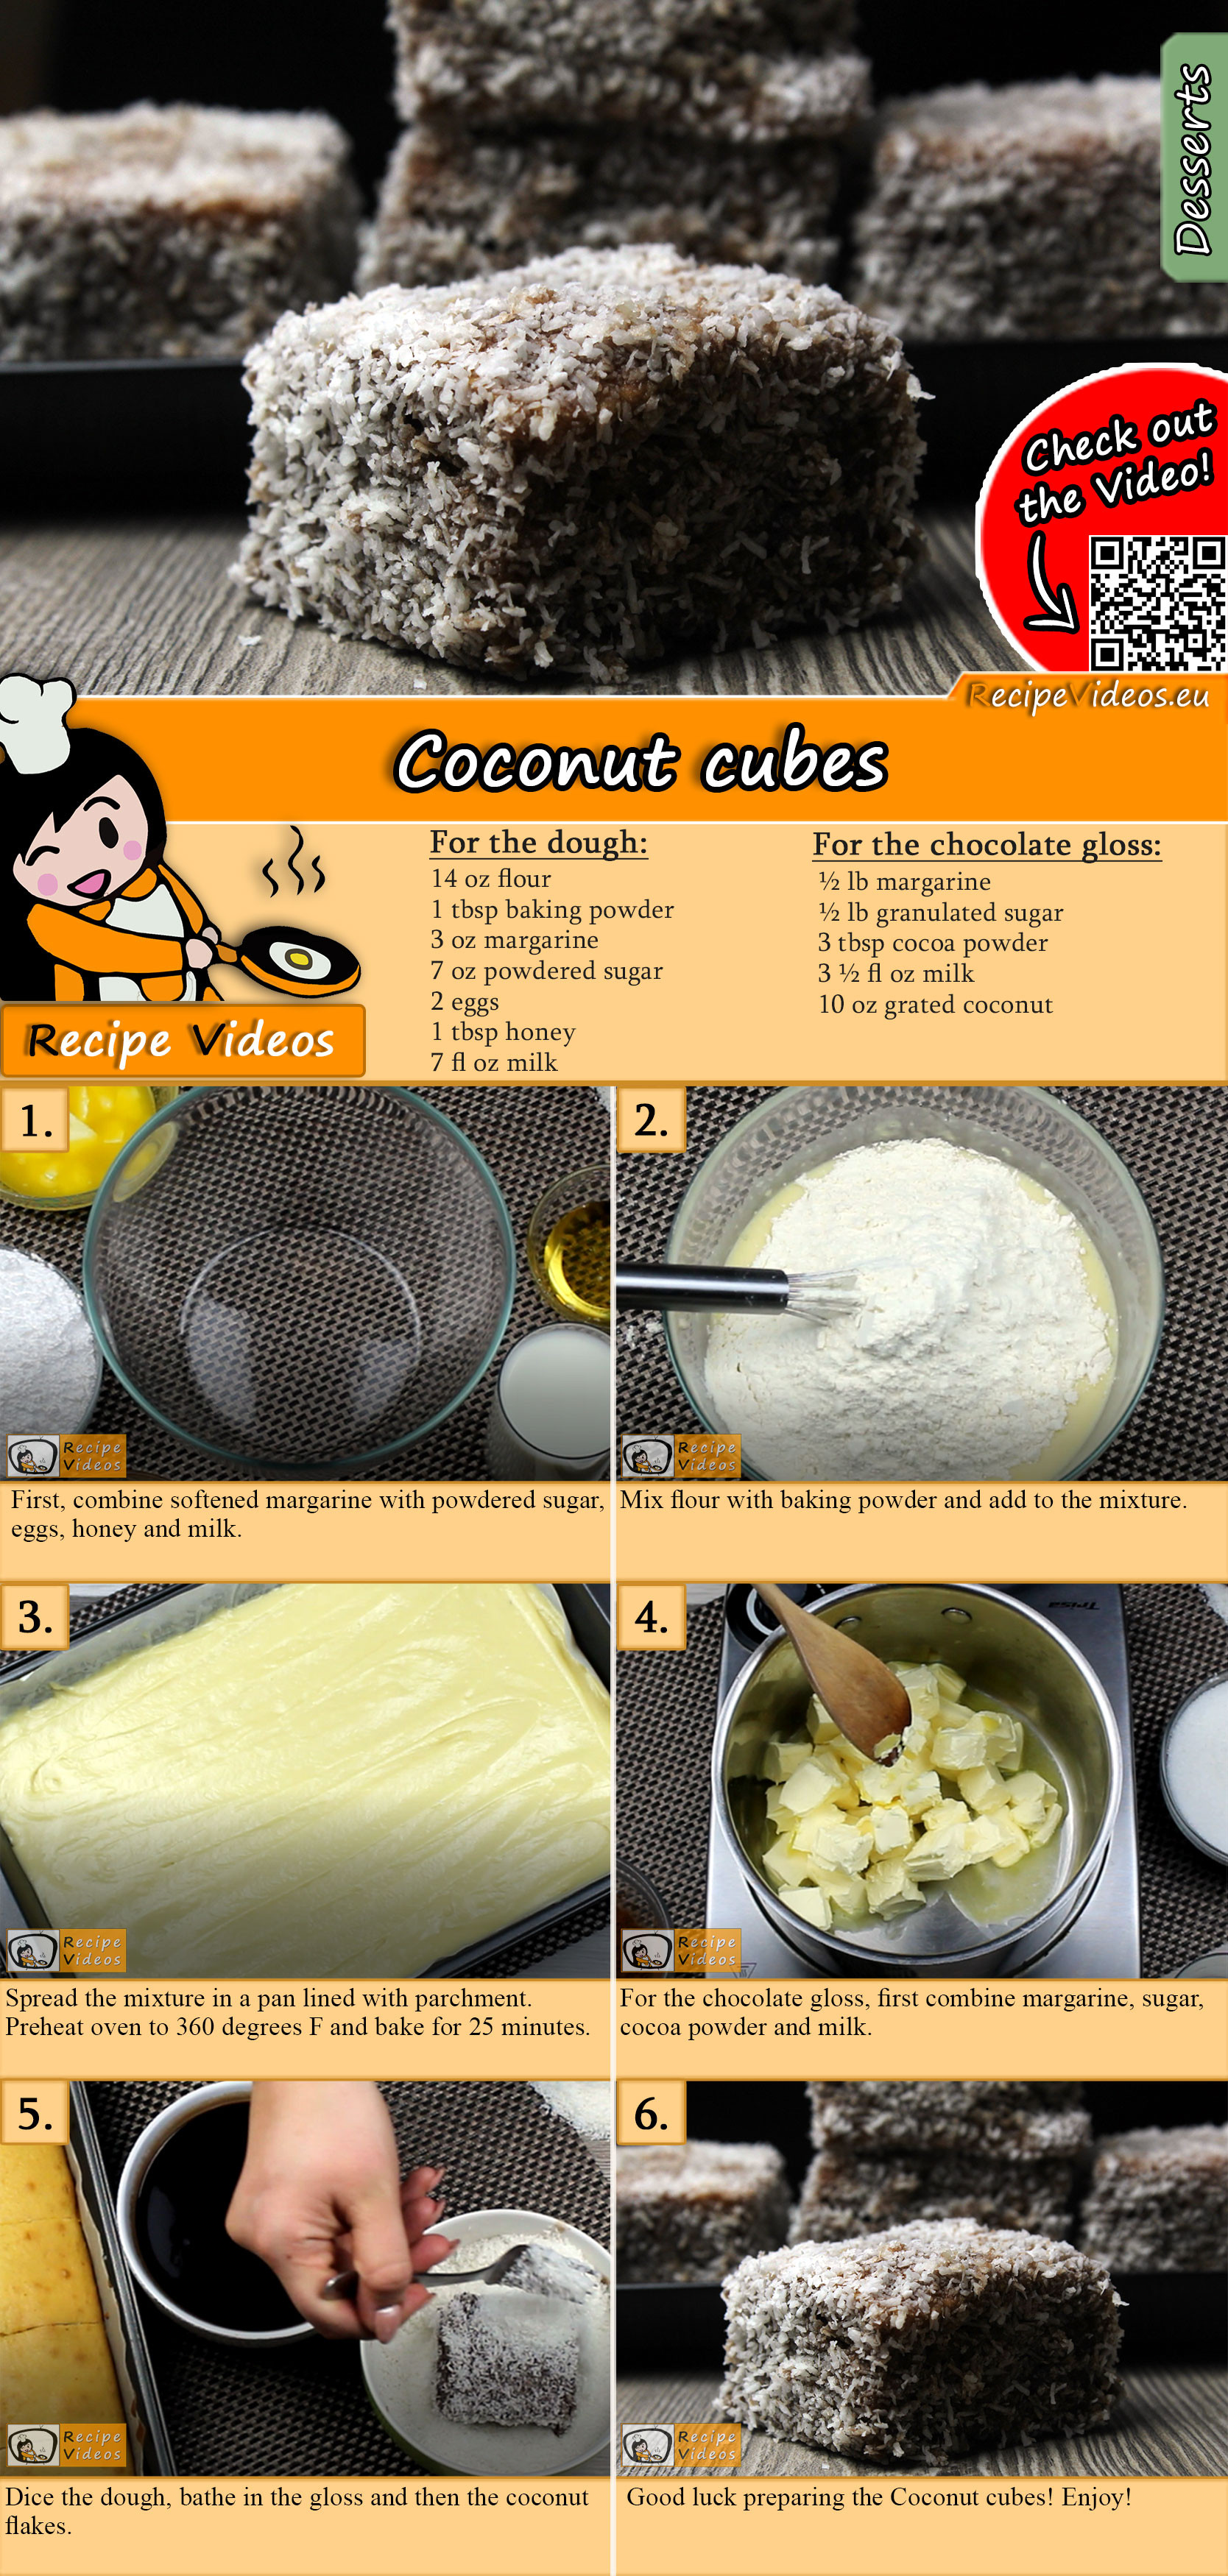 Coconut cubes recipe with video